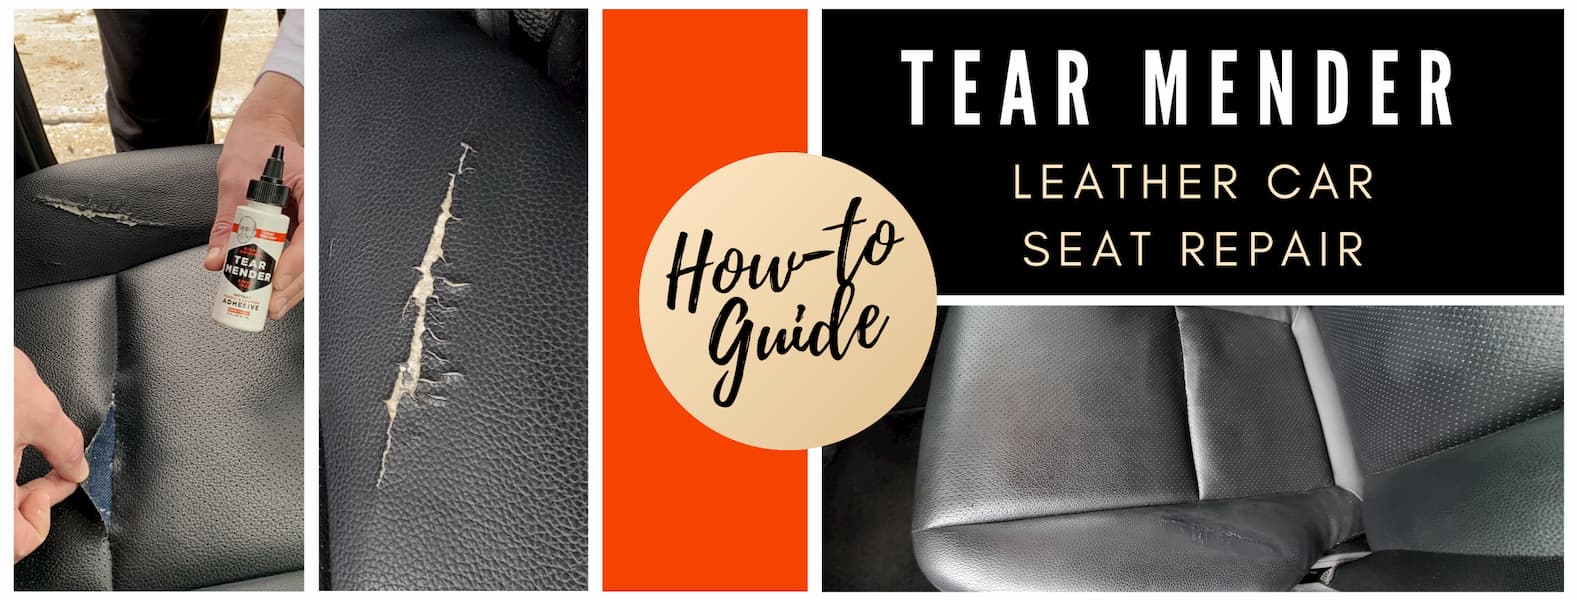 How-To Guide - Leather Car Seat Repair